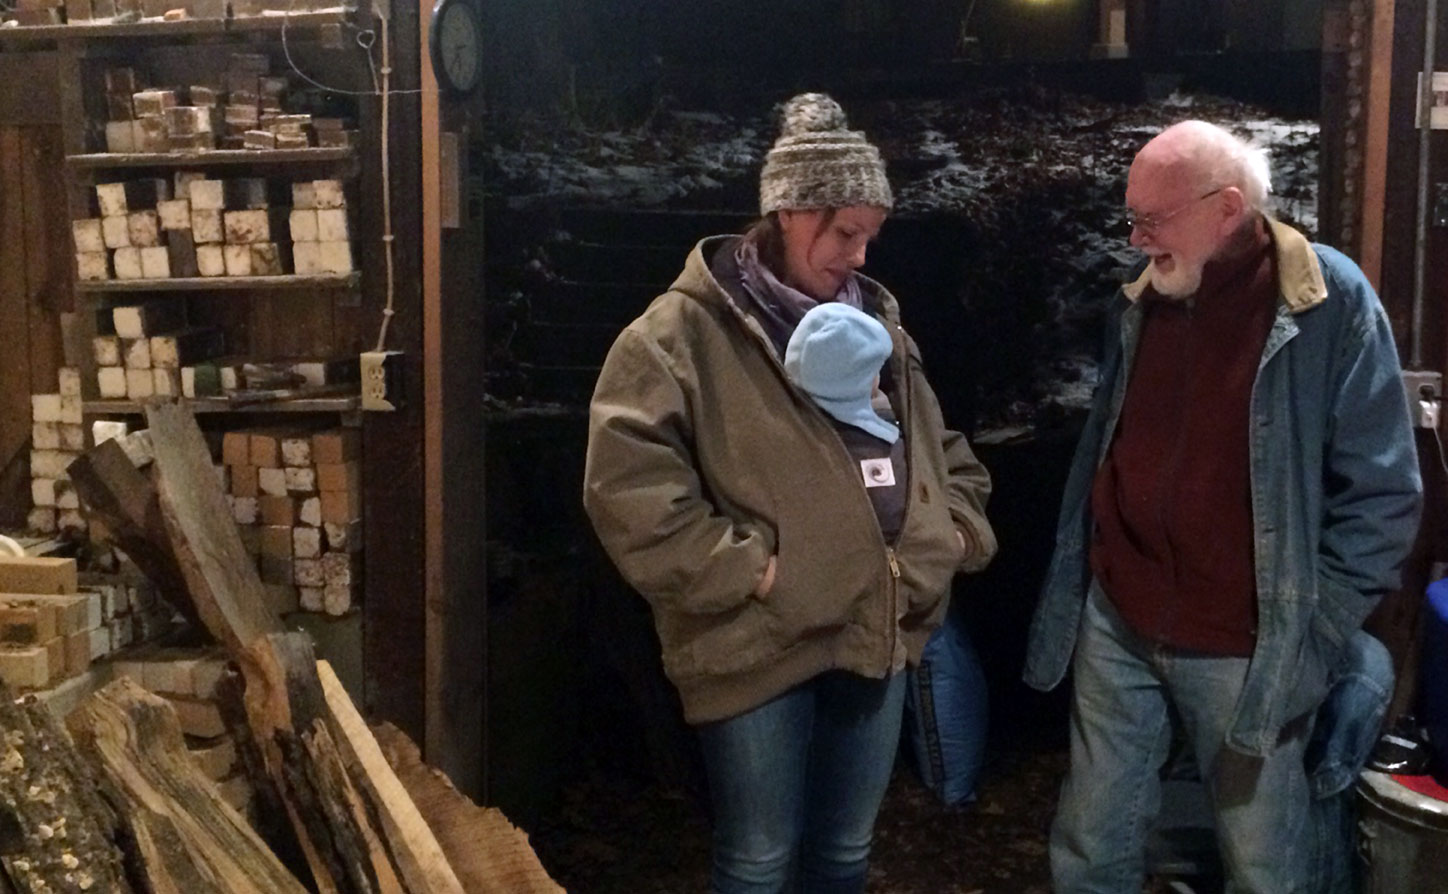 Kate and her son visit with Warren MacKenzie during a wood-firing.